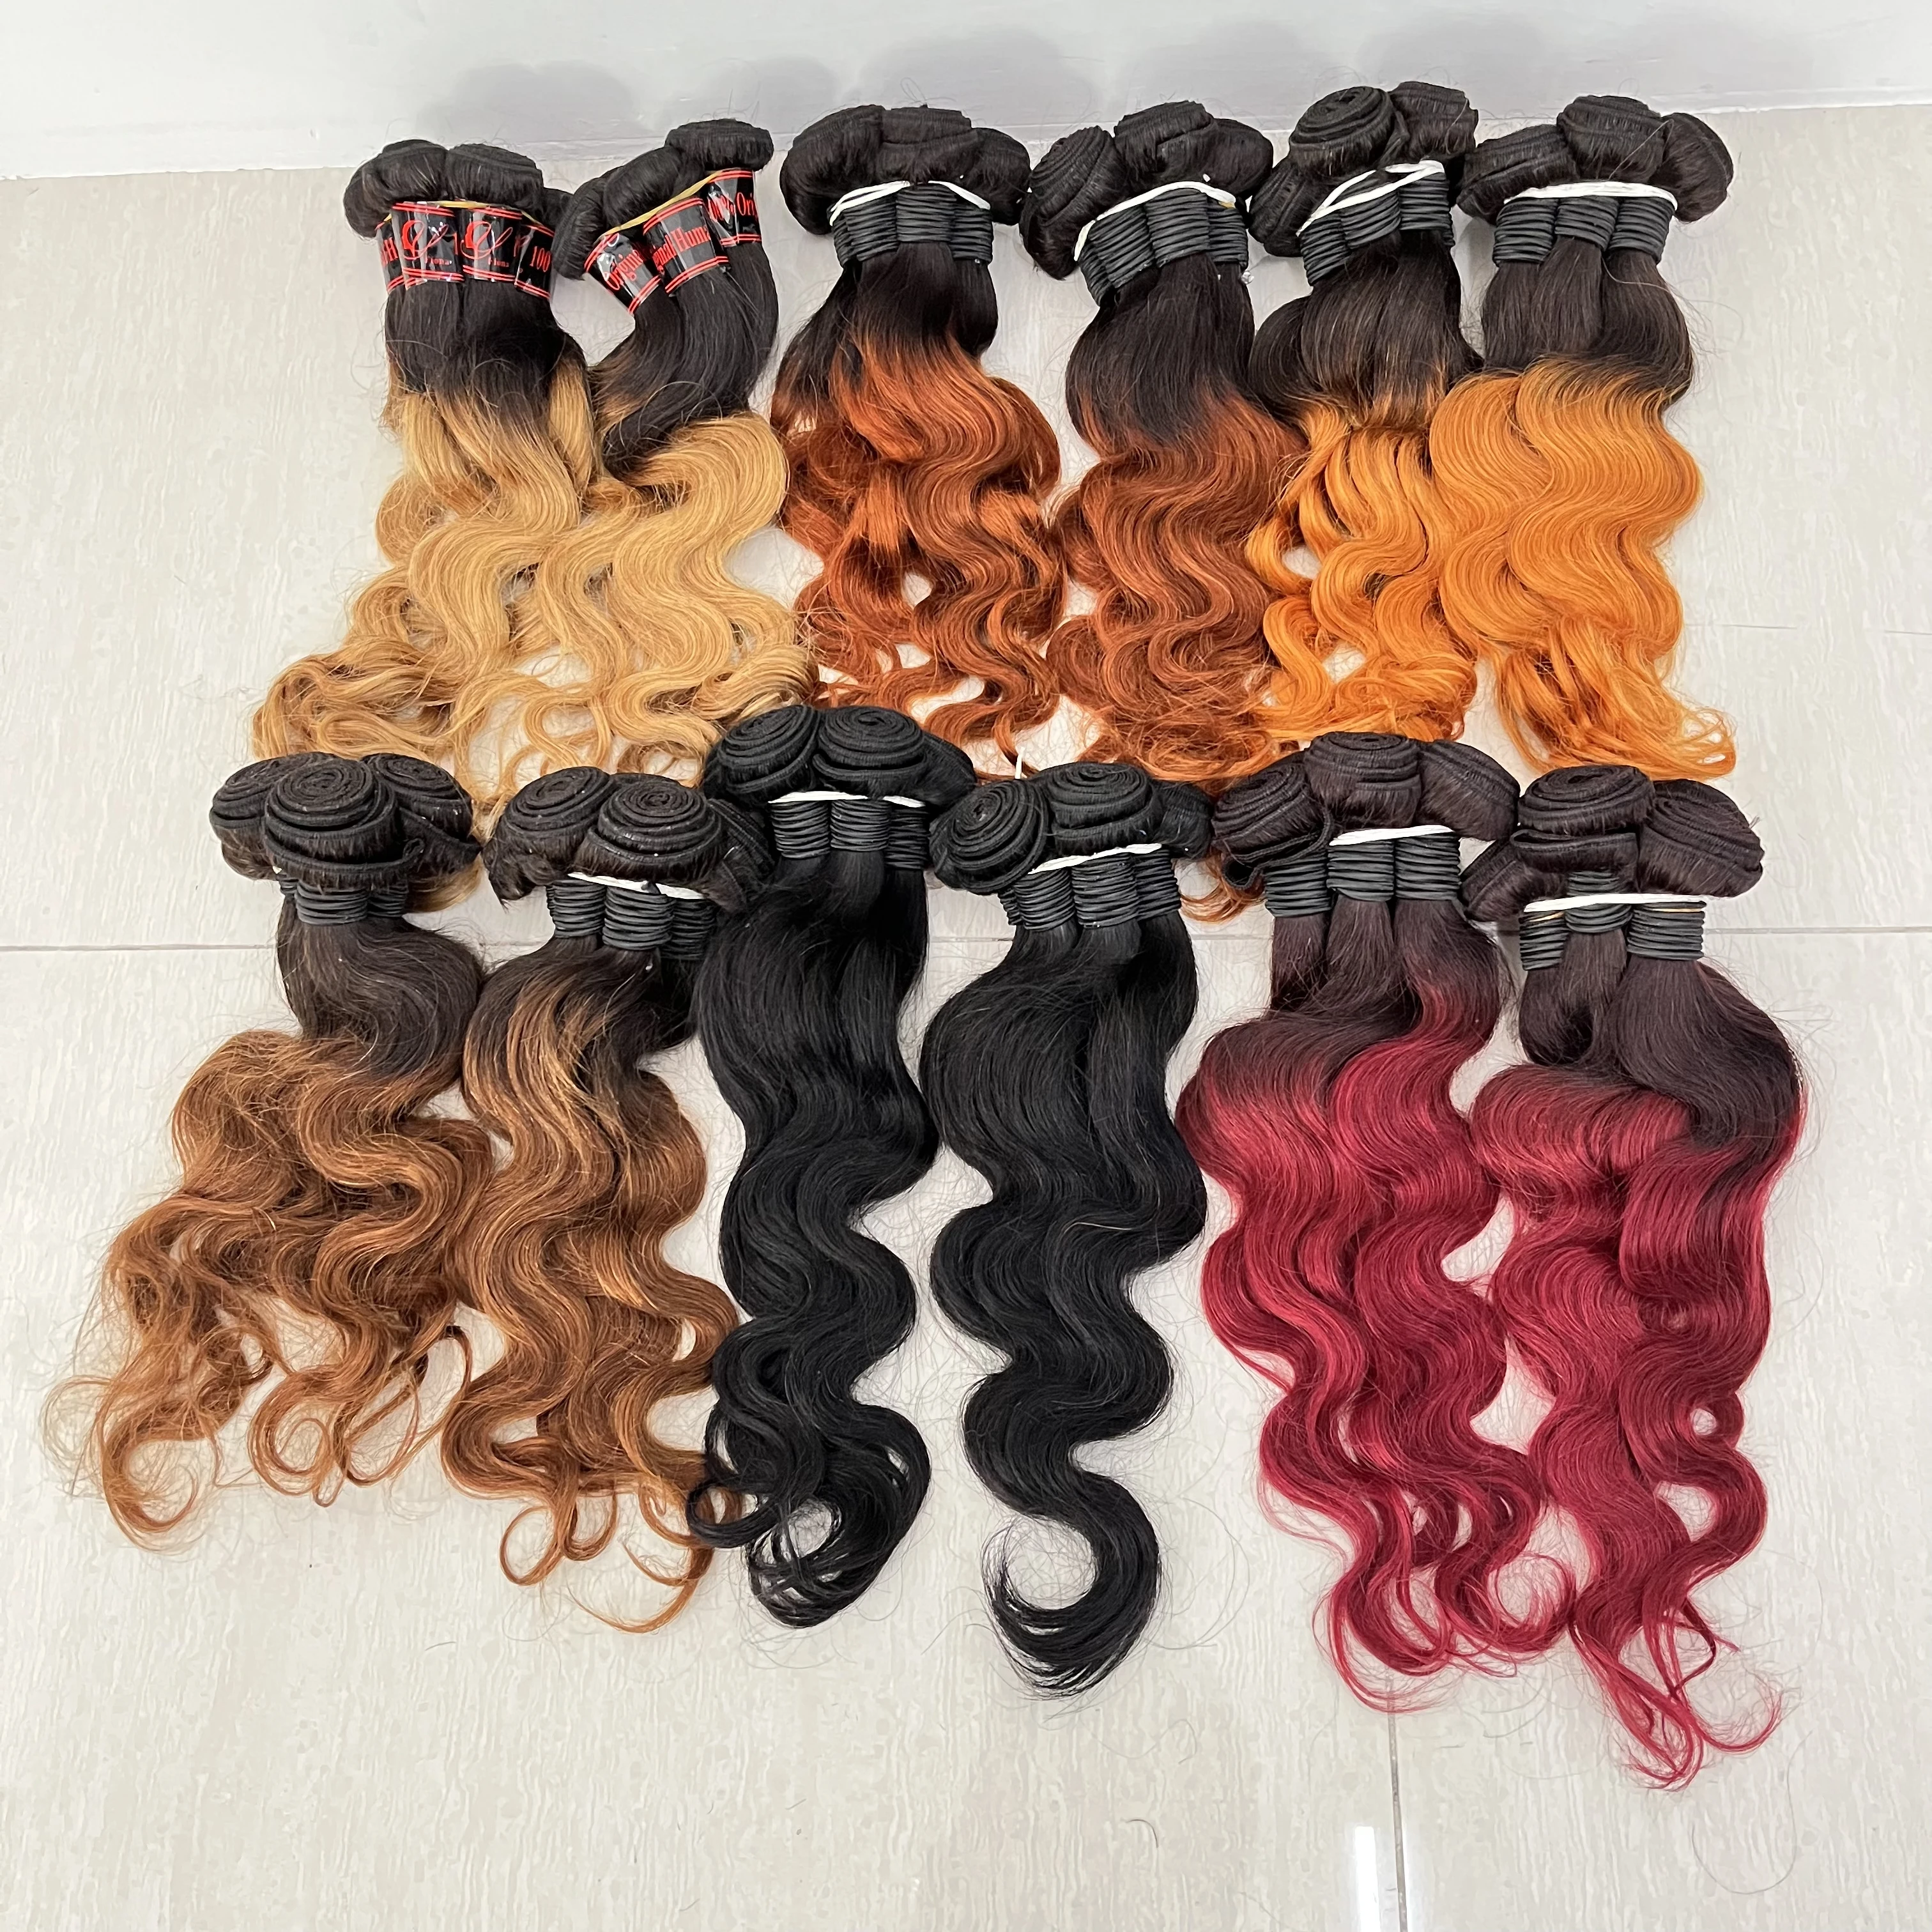 

Letsfly color hair extension human hair Body Wave 100% real Human Virgin Hair Bundle Weft Factory Price extension